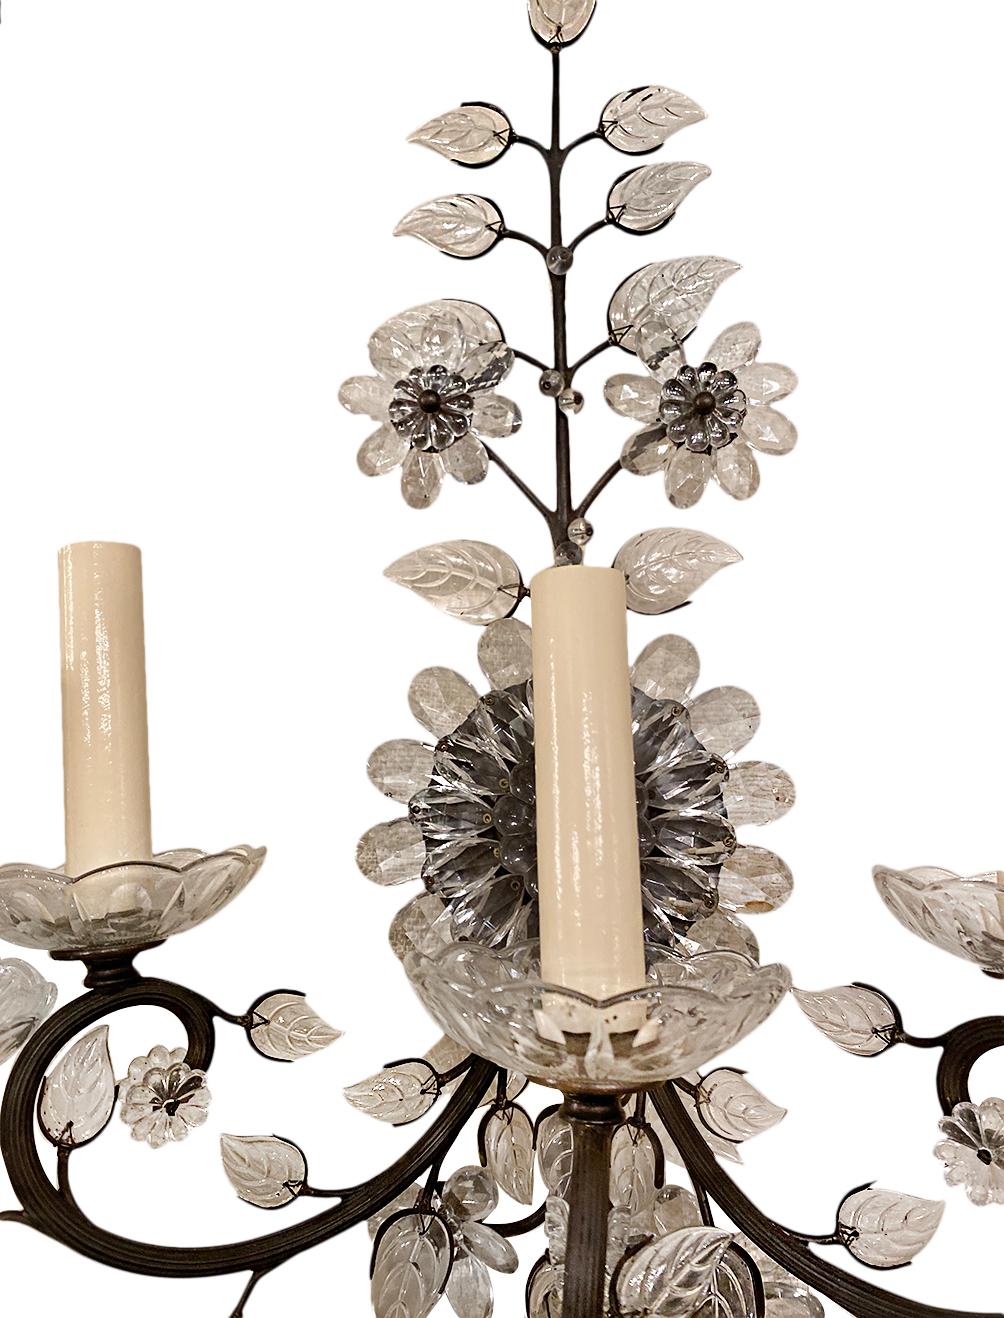 A pair of circa 1940's French sconces with molded glass leaves and flowers.

Measurements:
Height: 22.25